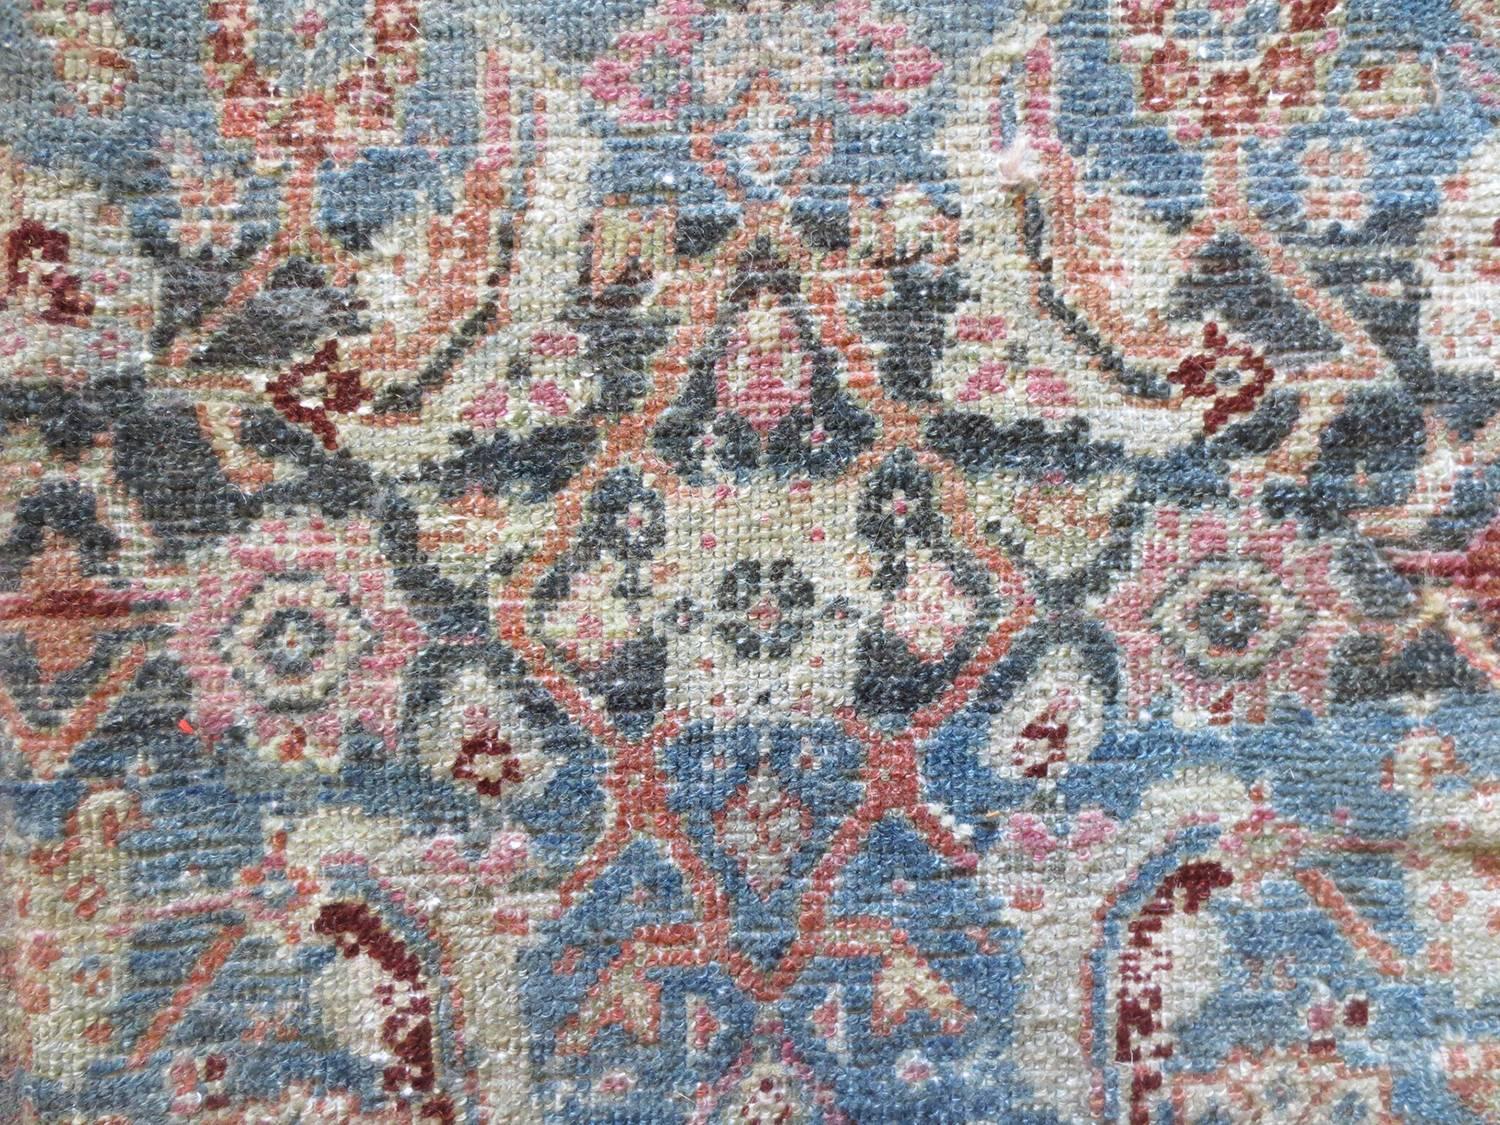 This is antique Persian Malayer runner circa 1880s showcases a lively display of activity. Brighter hues of reds, oranges, ivory, taupe greens contrast nicely against a beautiful light grey, charcoal blue field and allow the floral pattern to Stand